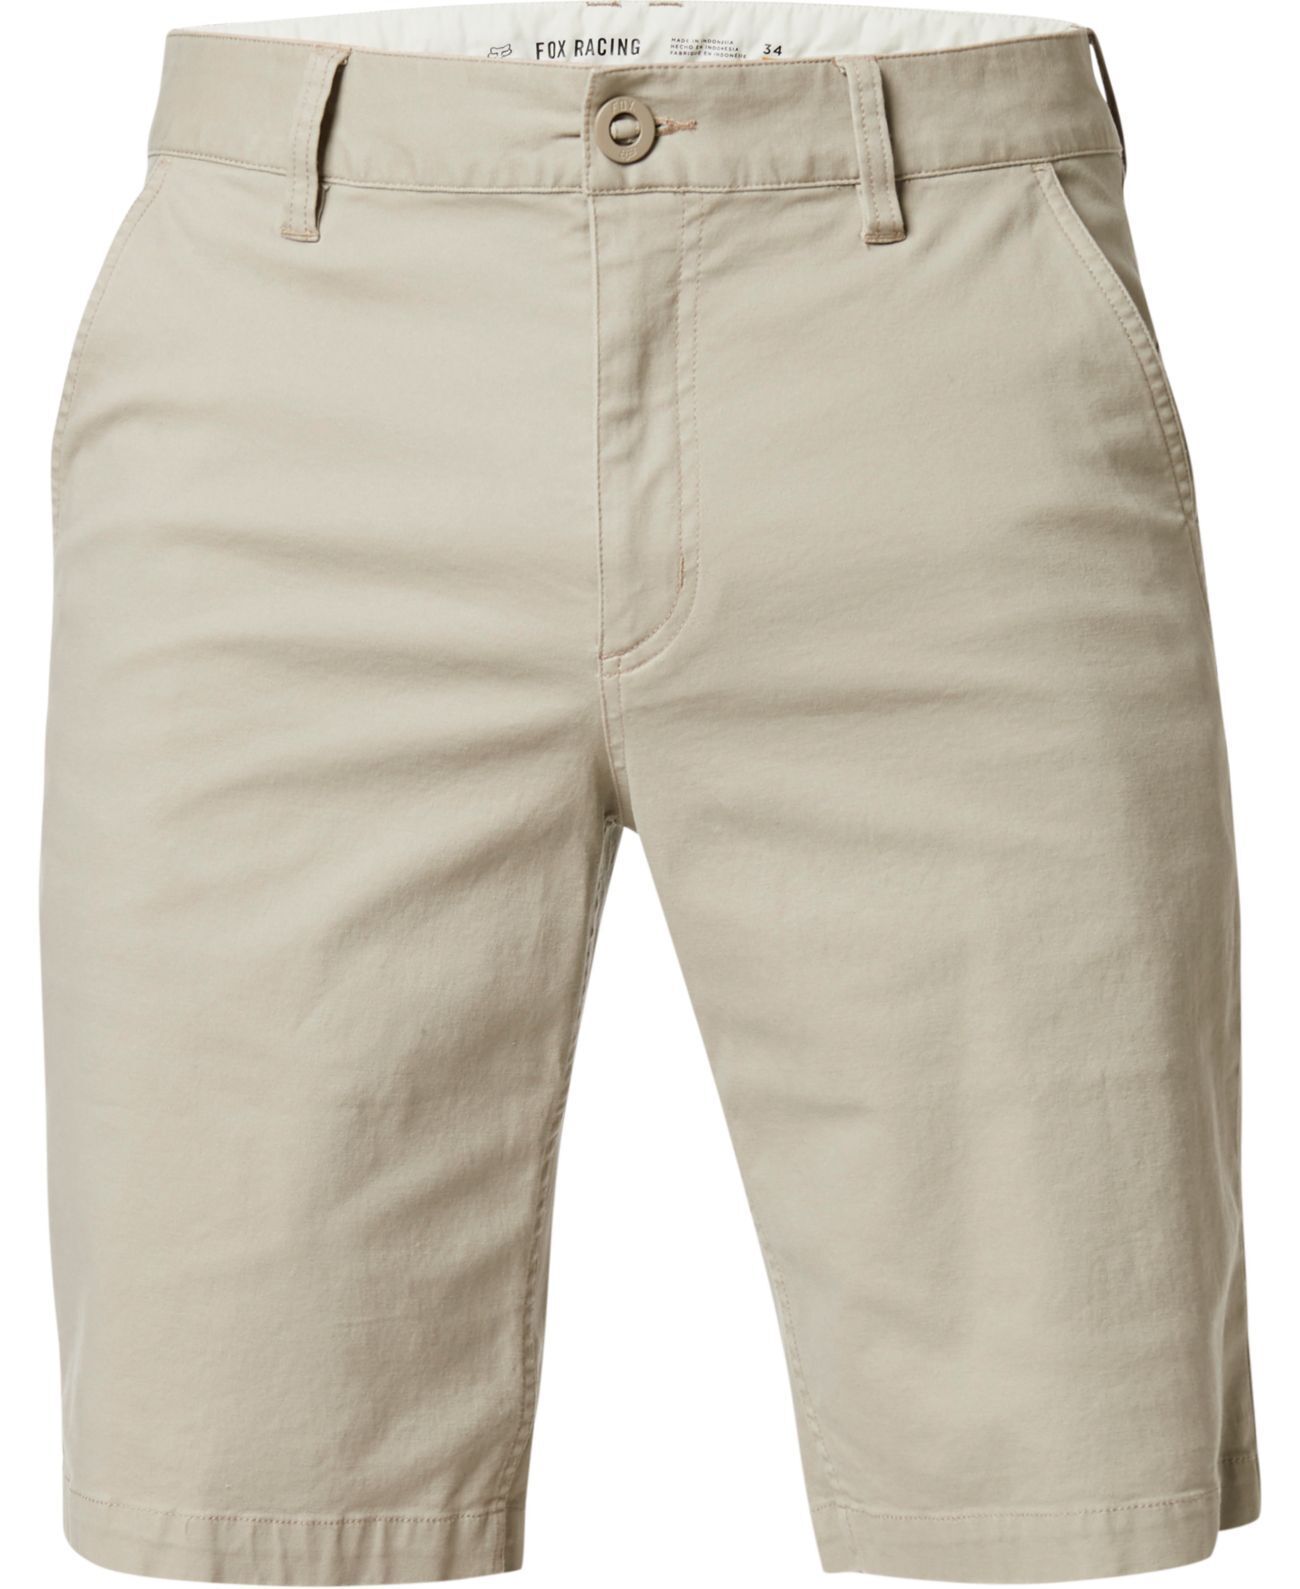 Primary image for Fox Racing Mens Essex Short Sand 28